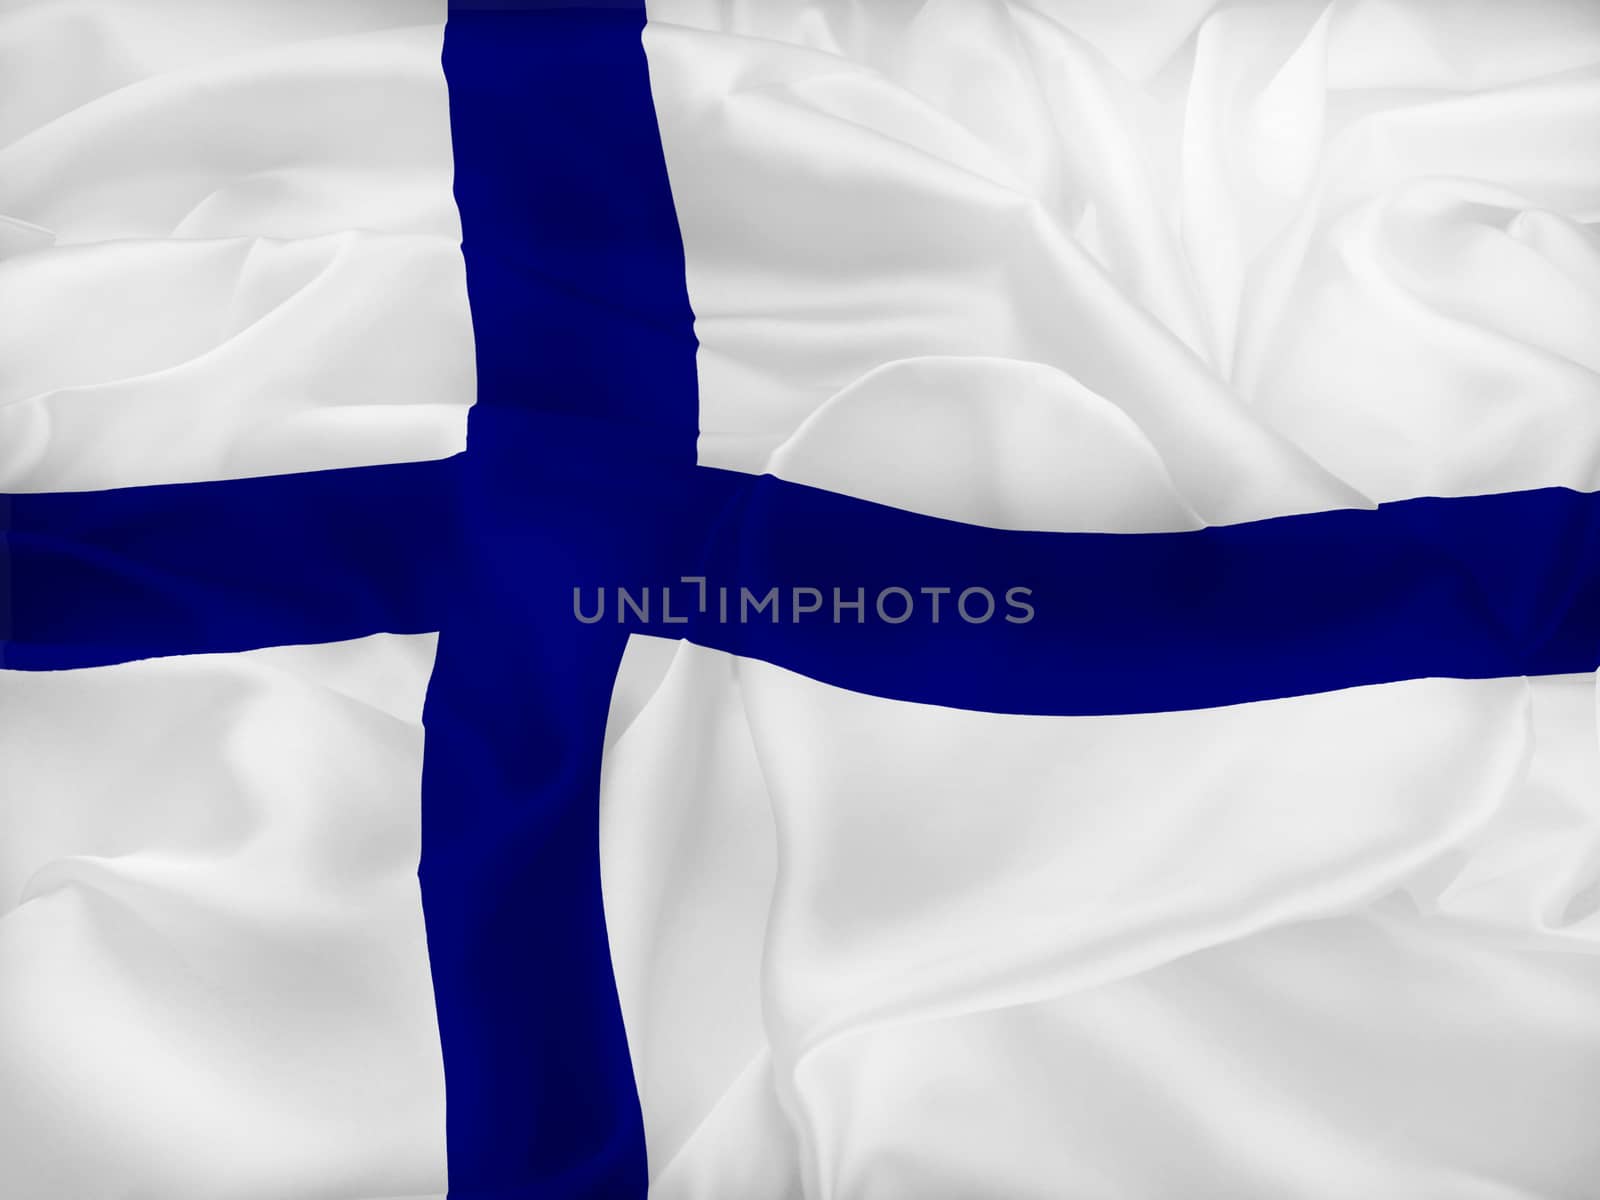 The flag of Finland, also called siniristilippu (Blue Cross Flag), dates from the beginning of the 20th century. It features a blue Nordic cross, which represents Christianity.